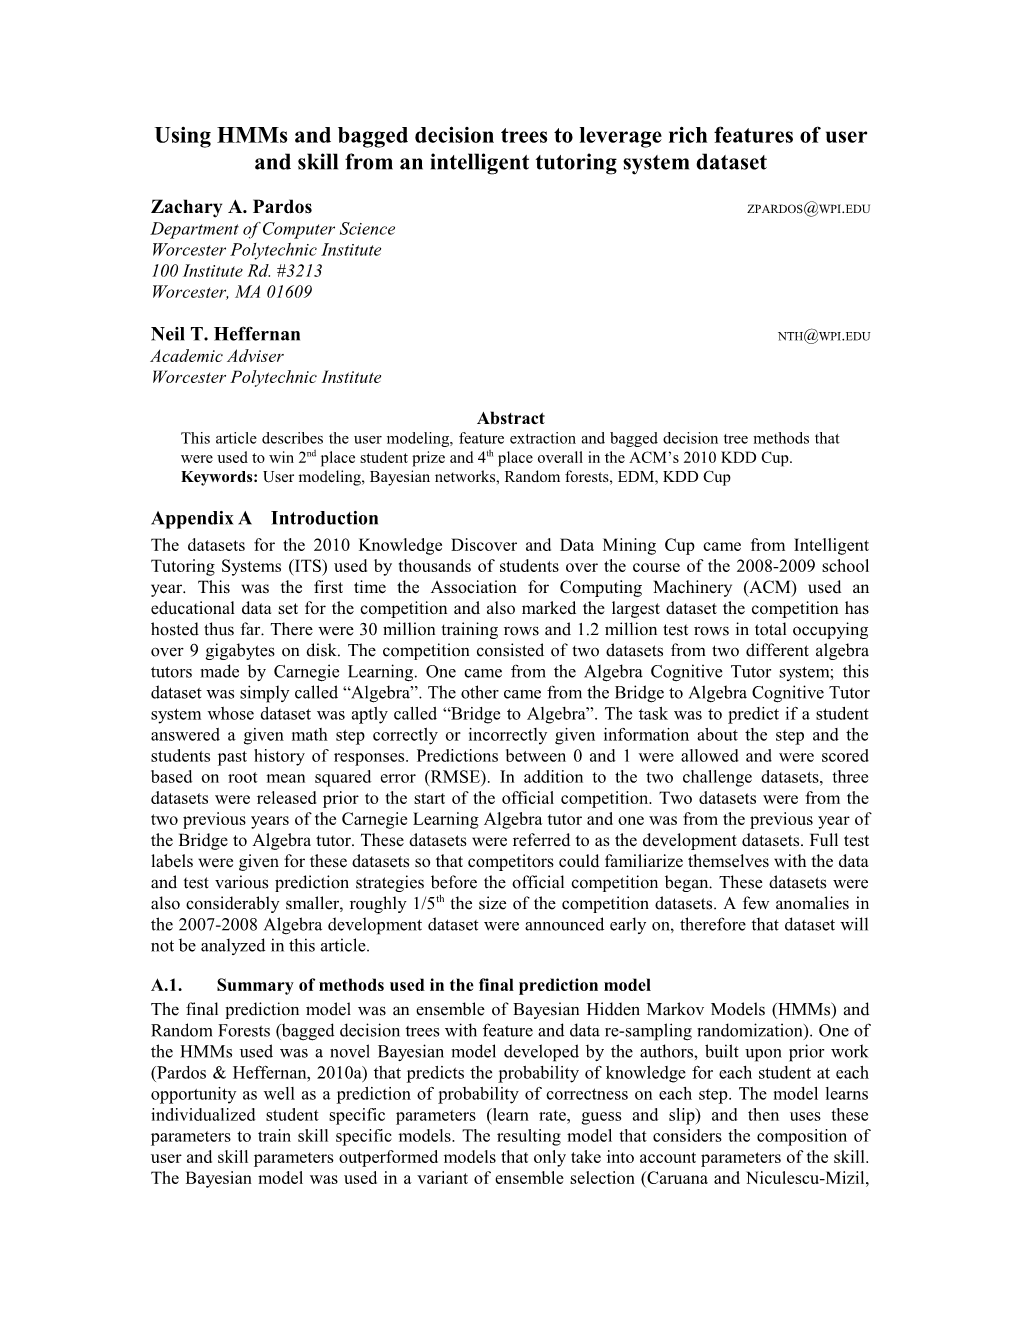 Journal of Machine Learning Research Microsoft Word Template